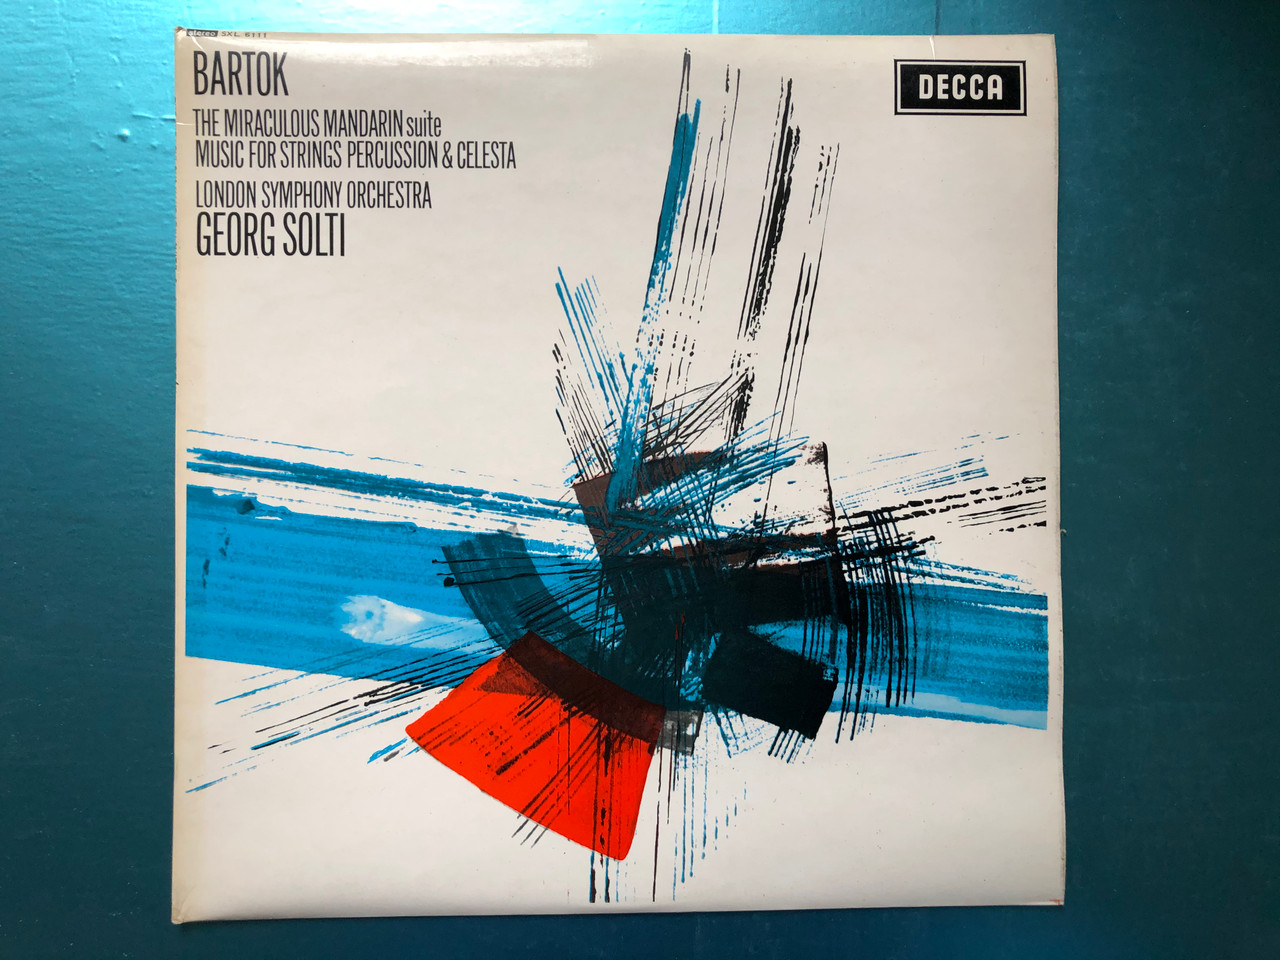 https://cdn10.bigcommerce.com/s-62bdpkt7pb/products/30144/images/178687/Bartok_-_The_Miraculous_Mandarin_Suite_Music_For_Strings_Percussion_Celesta_London_Symphony_Orchestra_Georg_Solti_Decca_LP_1964_Stereo_SXL_6111_1__13999.1621489952.1280.1280.JPG?c=2&_ga=2.126308932.879688297.1621519482-1432666408.1621519482